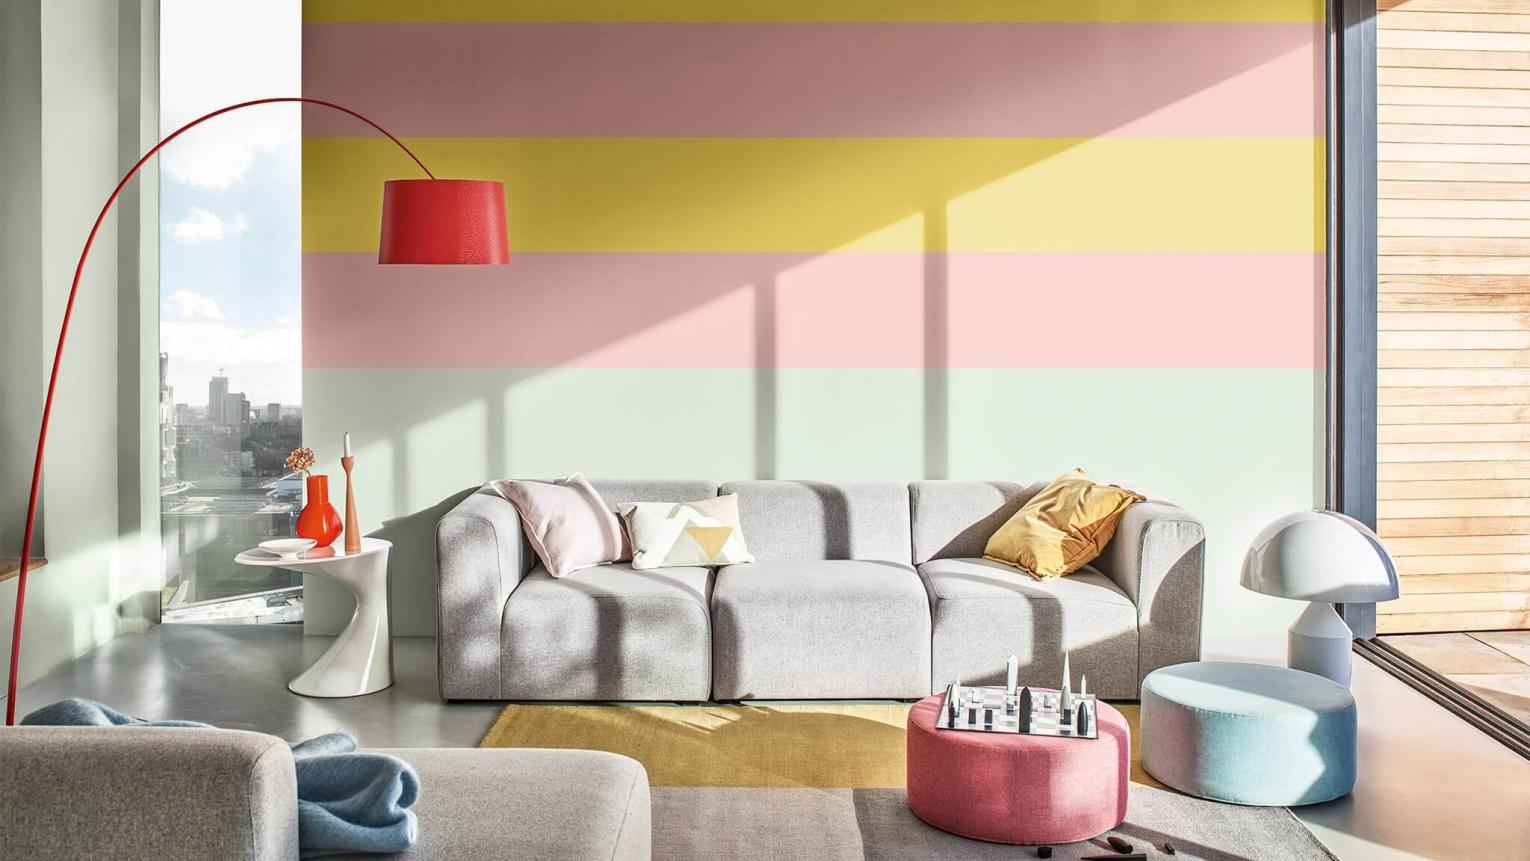 How To Paint Stripes On A Wall With, Wall Painting For Living Room Uk